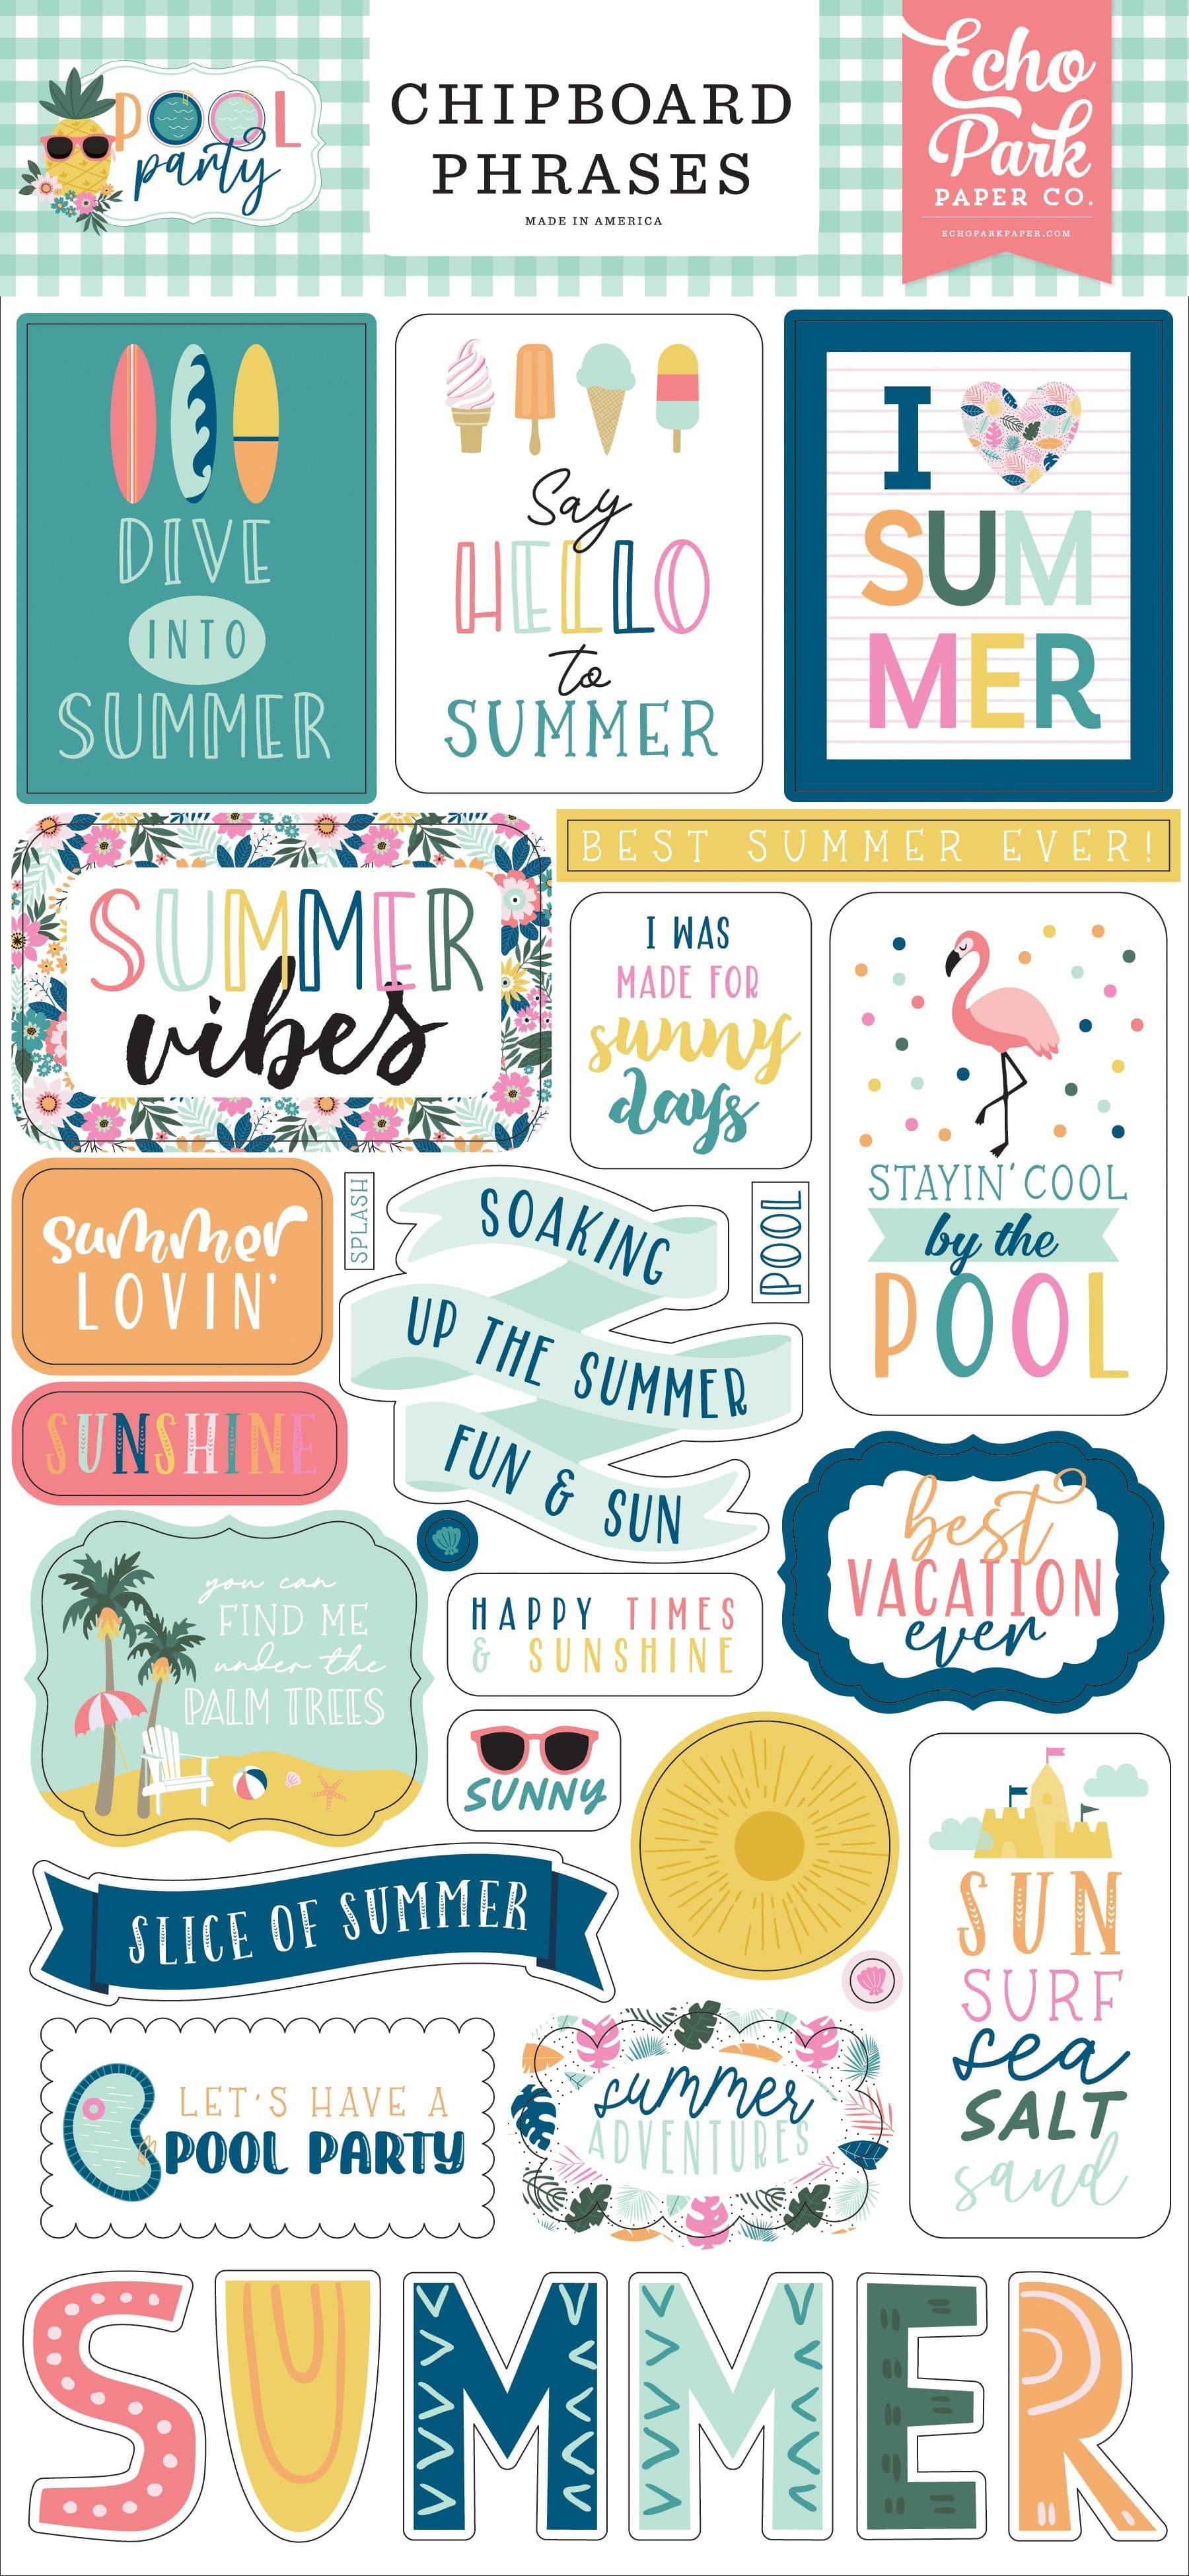 Pool Party Collection 6 x 12 Chipboard Phrases Scrapbook Embellishments by Echo Park Paper - Scrapbook Supply Companies